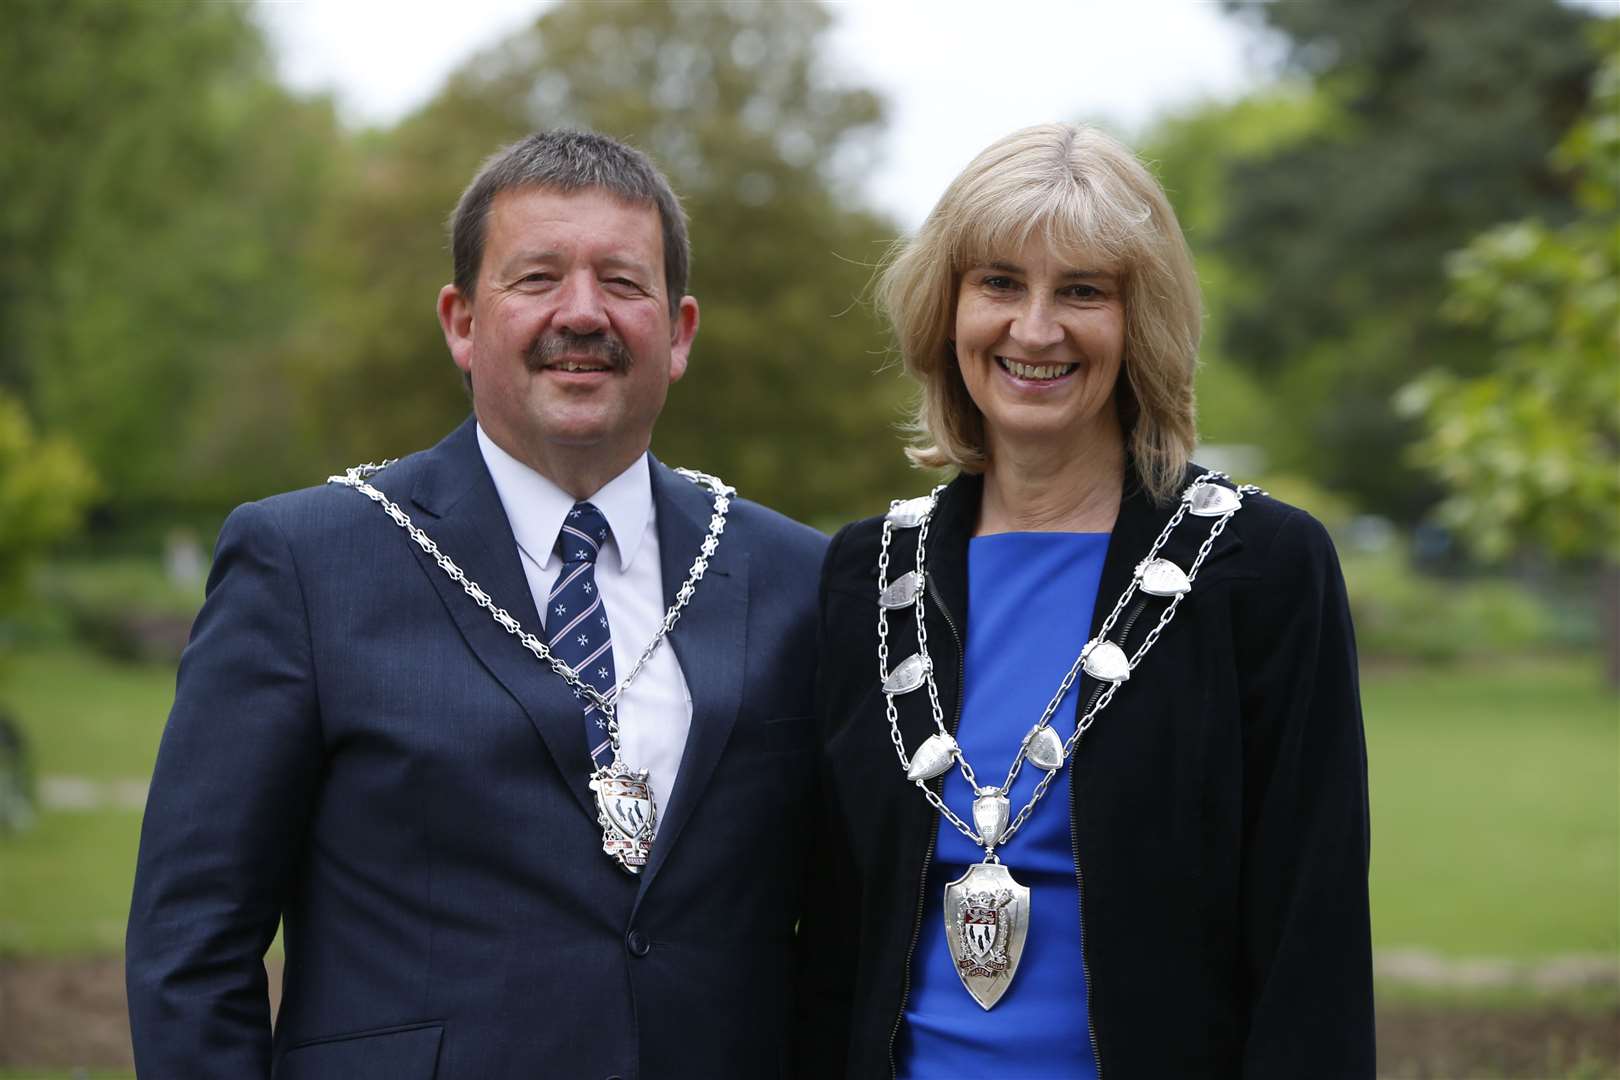 Councillors Ian and Jeanette Stockley